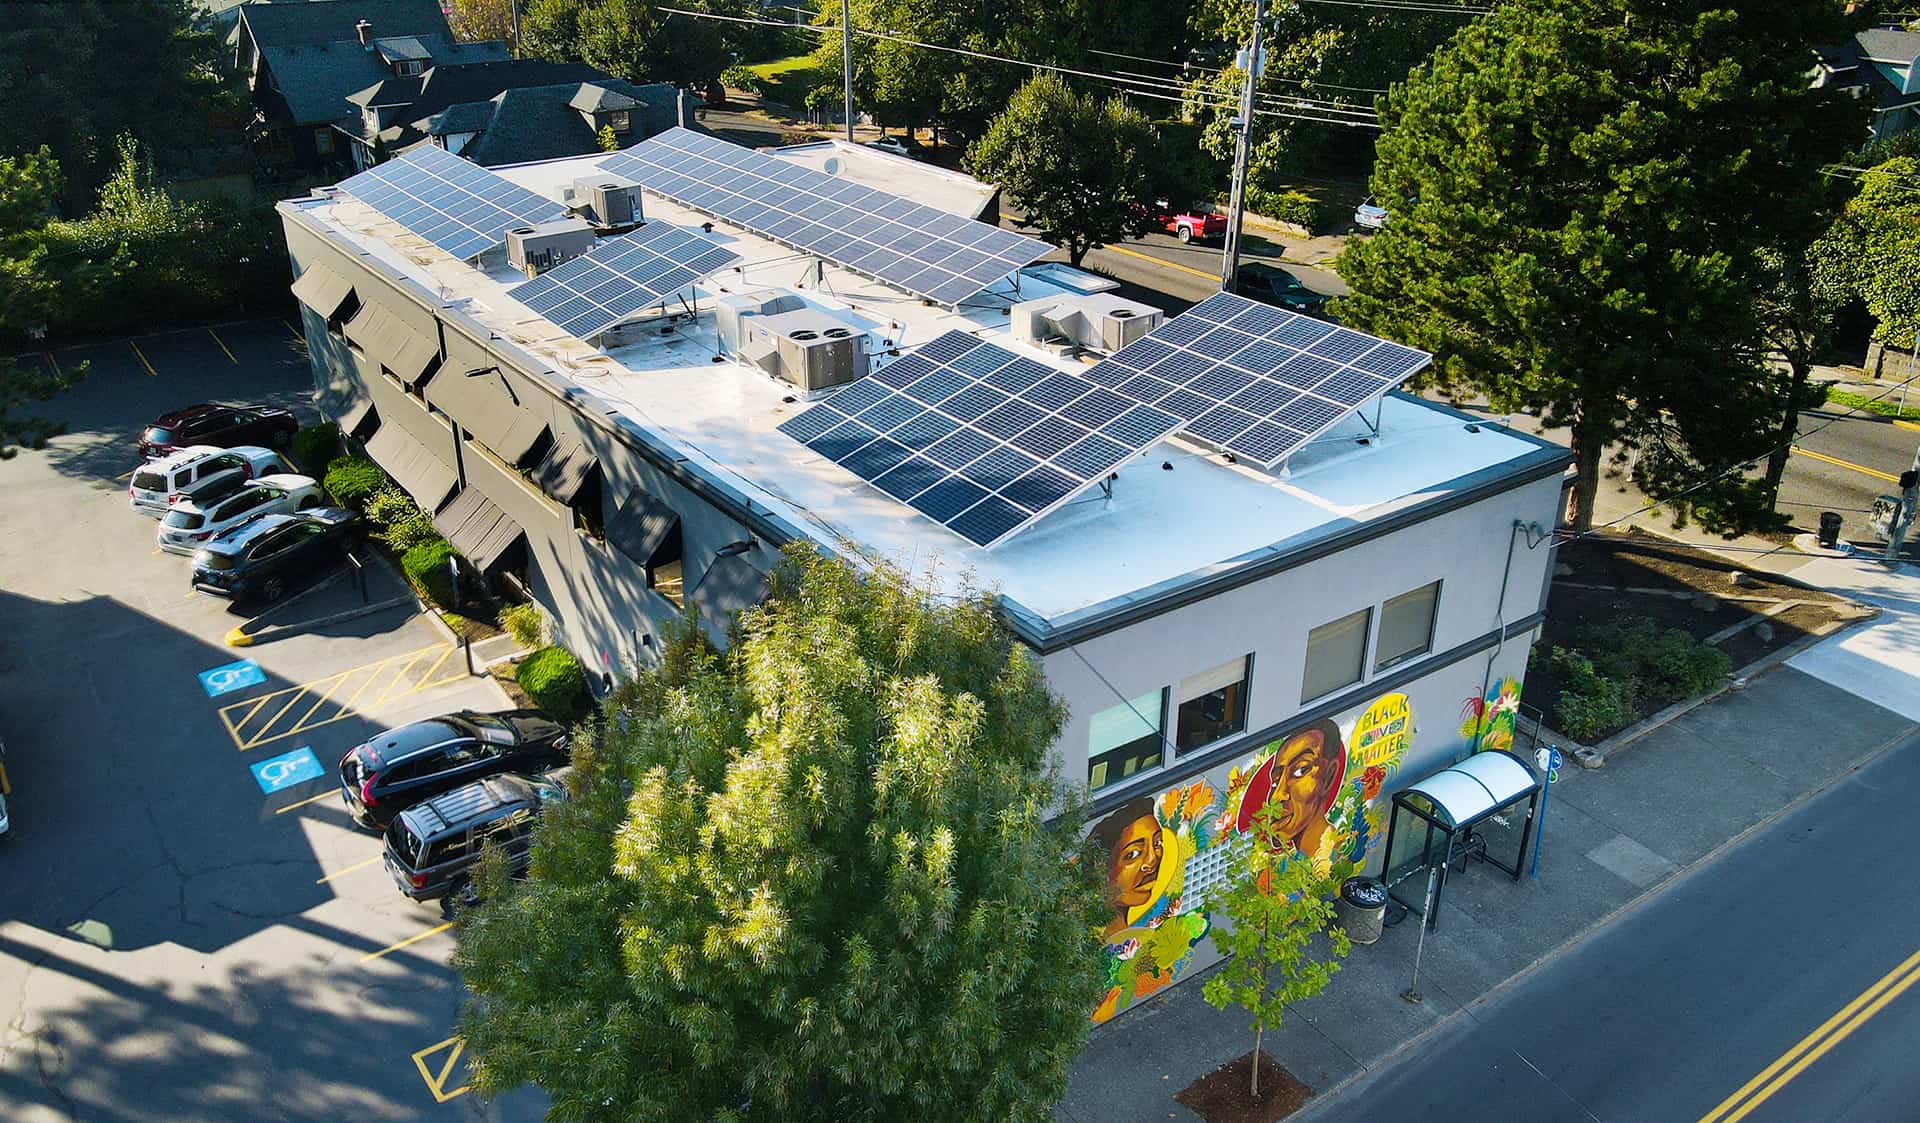 Solar panels on the roof at Neil Kelly's headquarters in Portland, Oregon